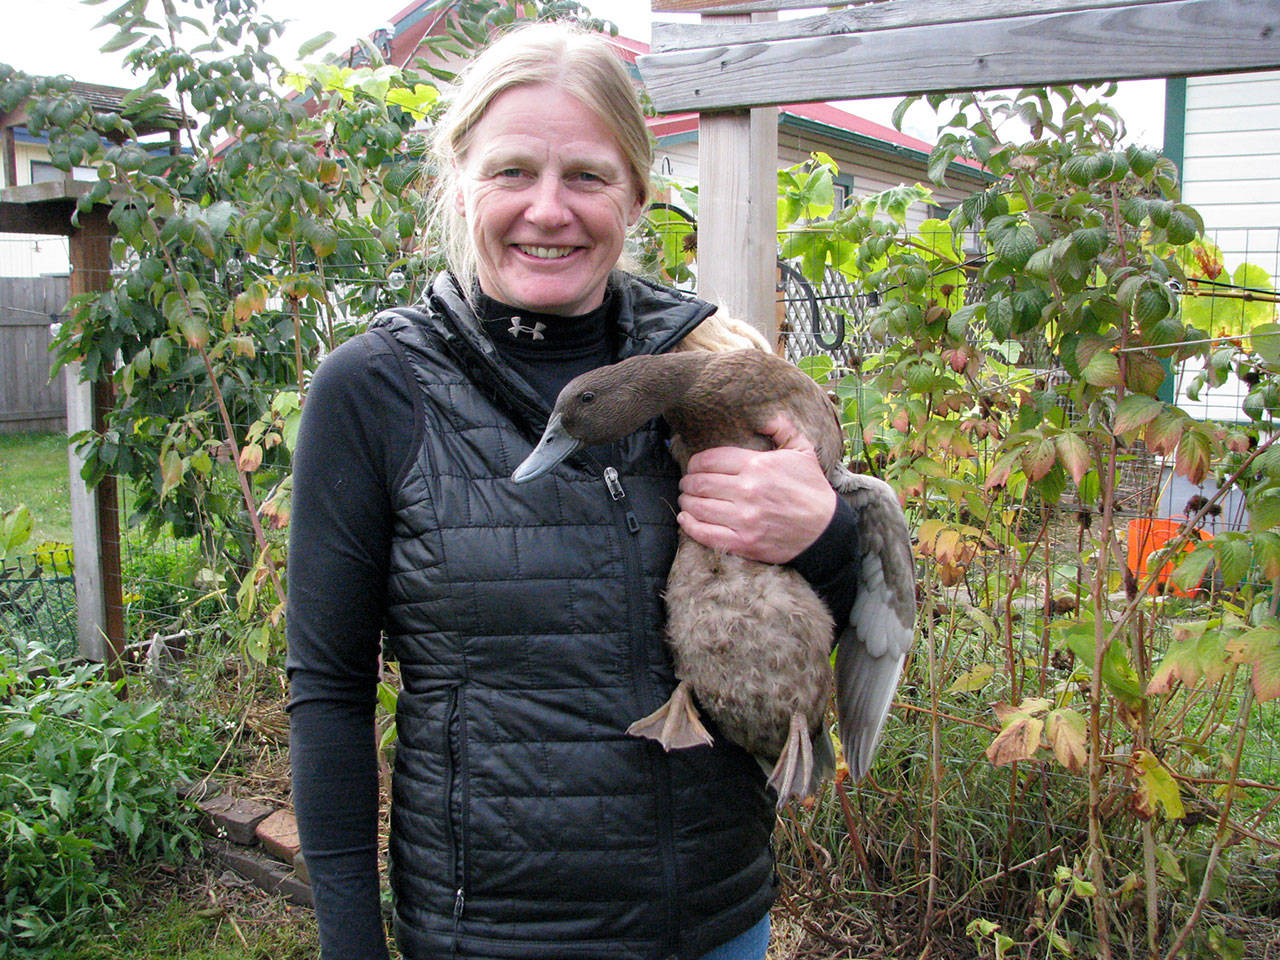 Selinda Barkhuis will host a talk on gardening with ducks Thursday afternoon in Port Angeles. (Washington State University Clallam County Extension)